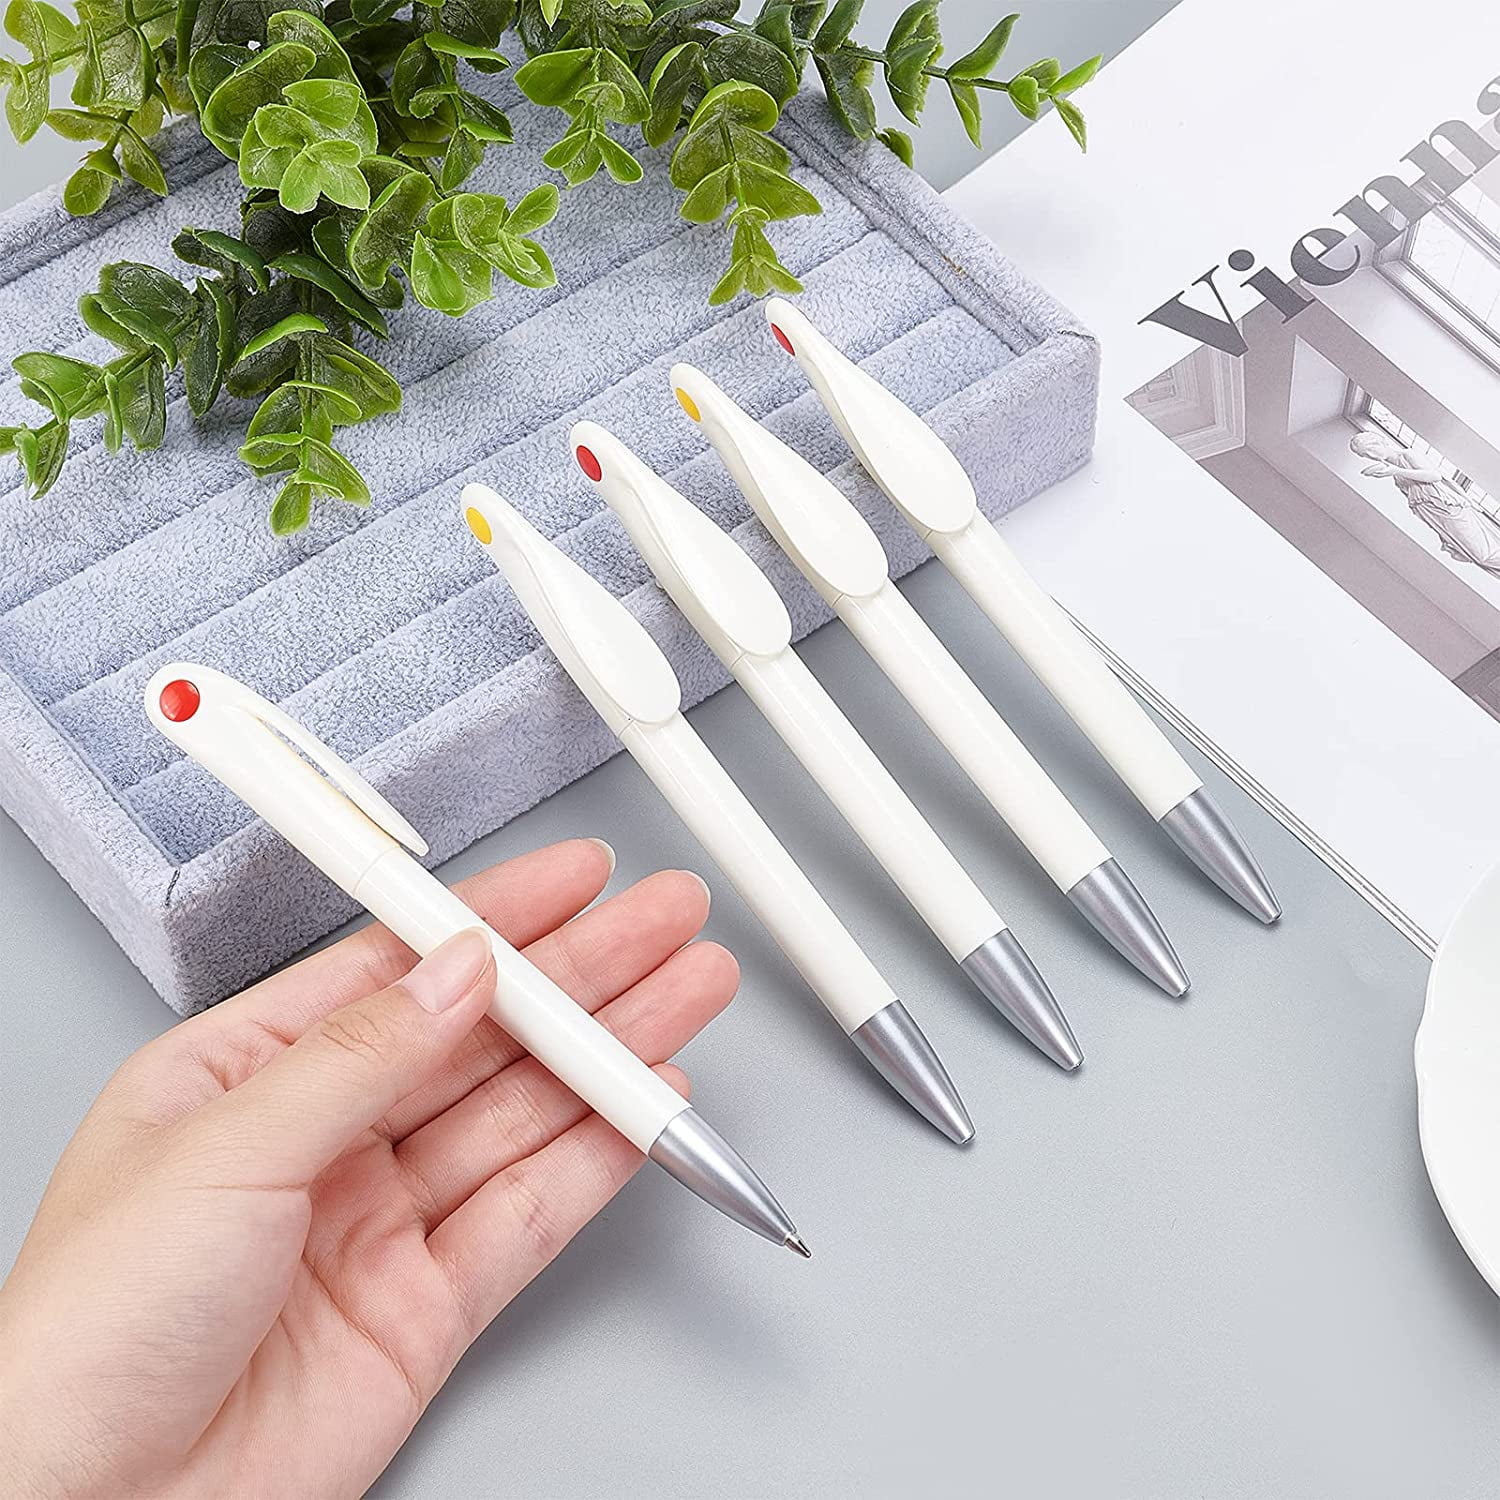 Wholesale Ballpoint Pens Sublimation Blank Ballpoint Pen White Diy  Advertising Business Heat Transfer Printing Gel Drop Delivery Office School  Dho35 From Nerdsropebags500mg, $0.99